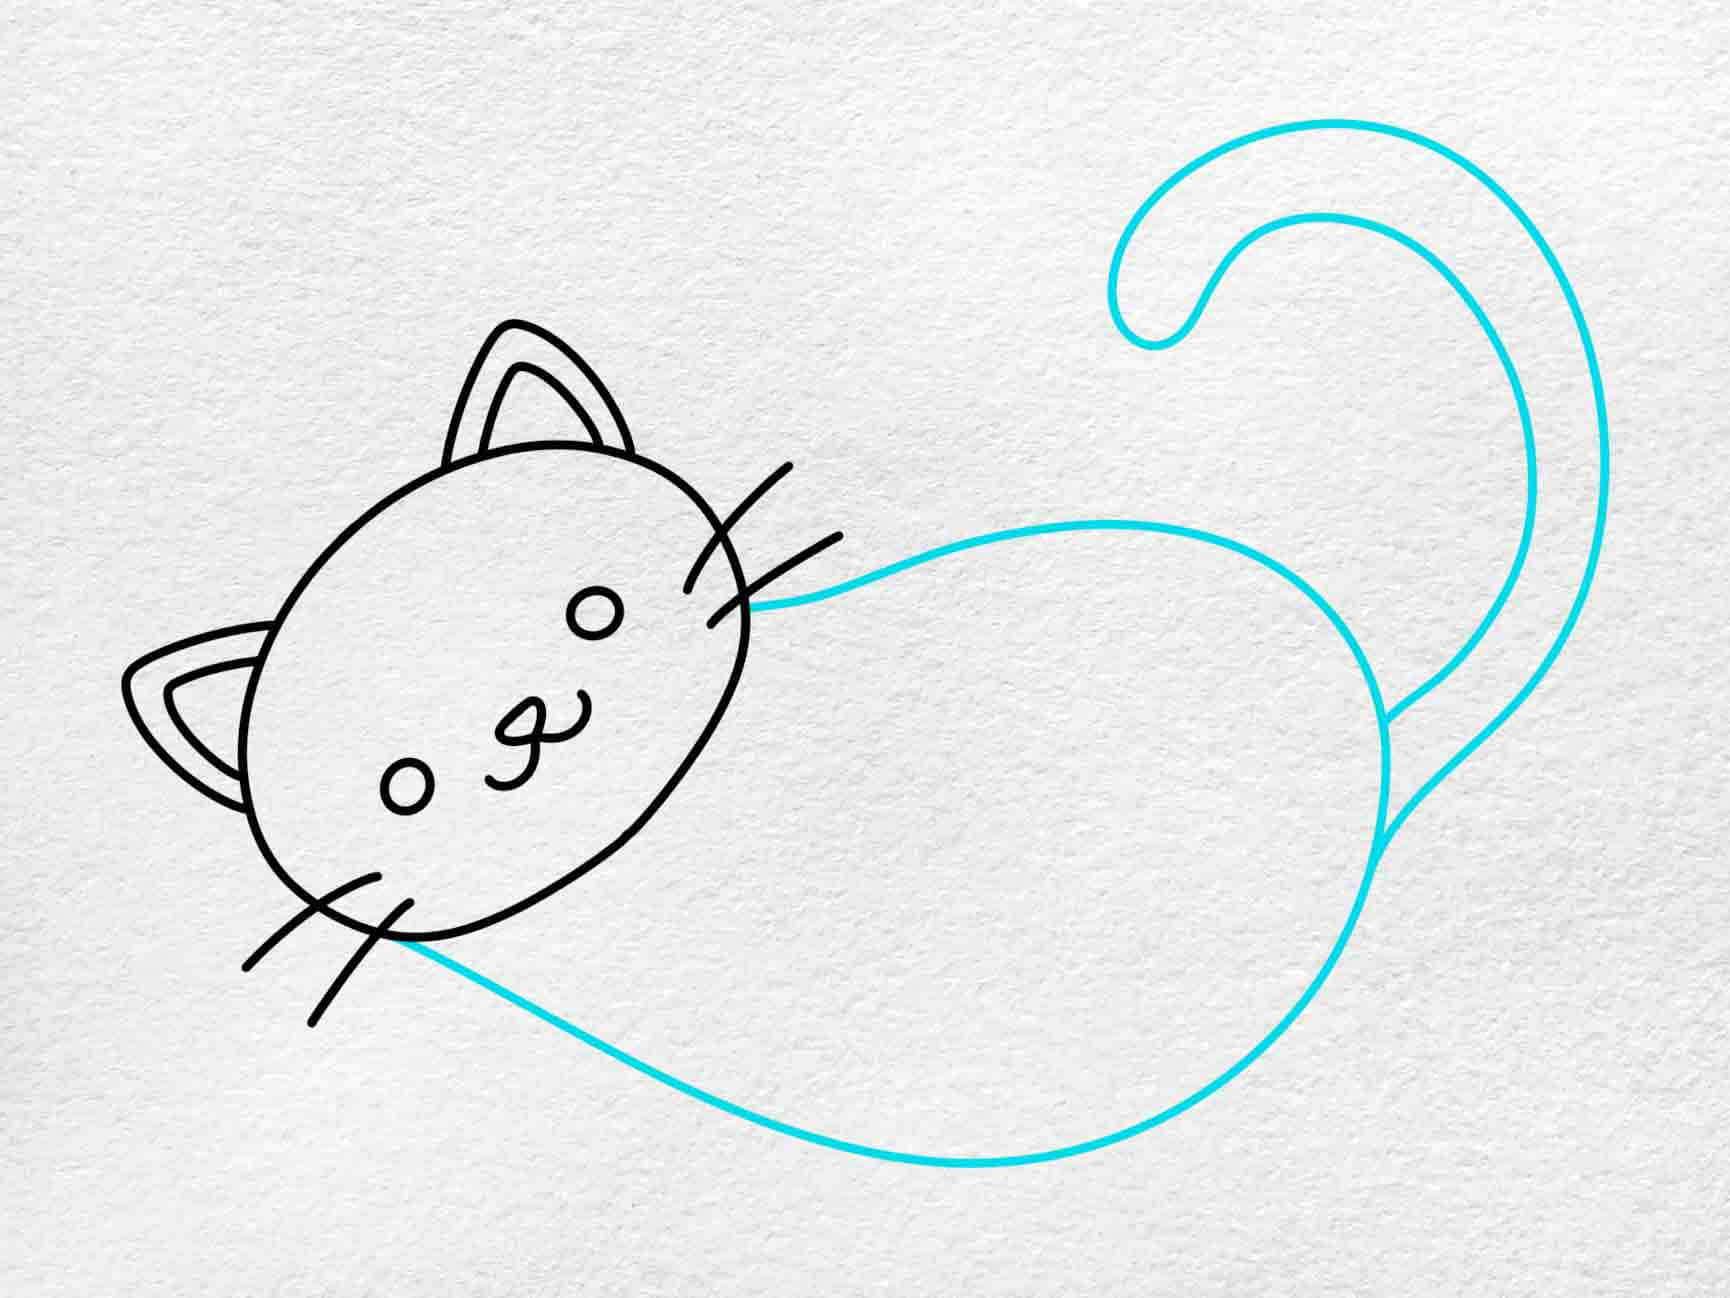 How to draw a cat face and silhouette with easy step by step tutorials